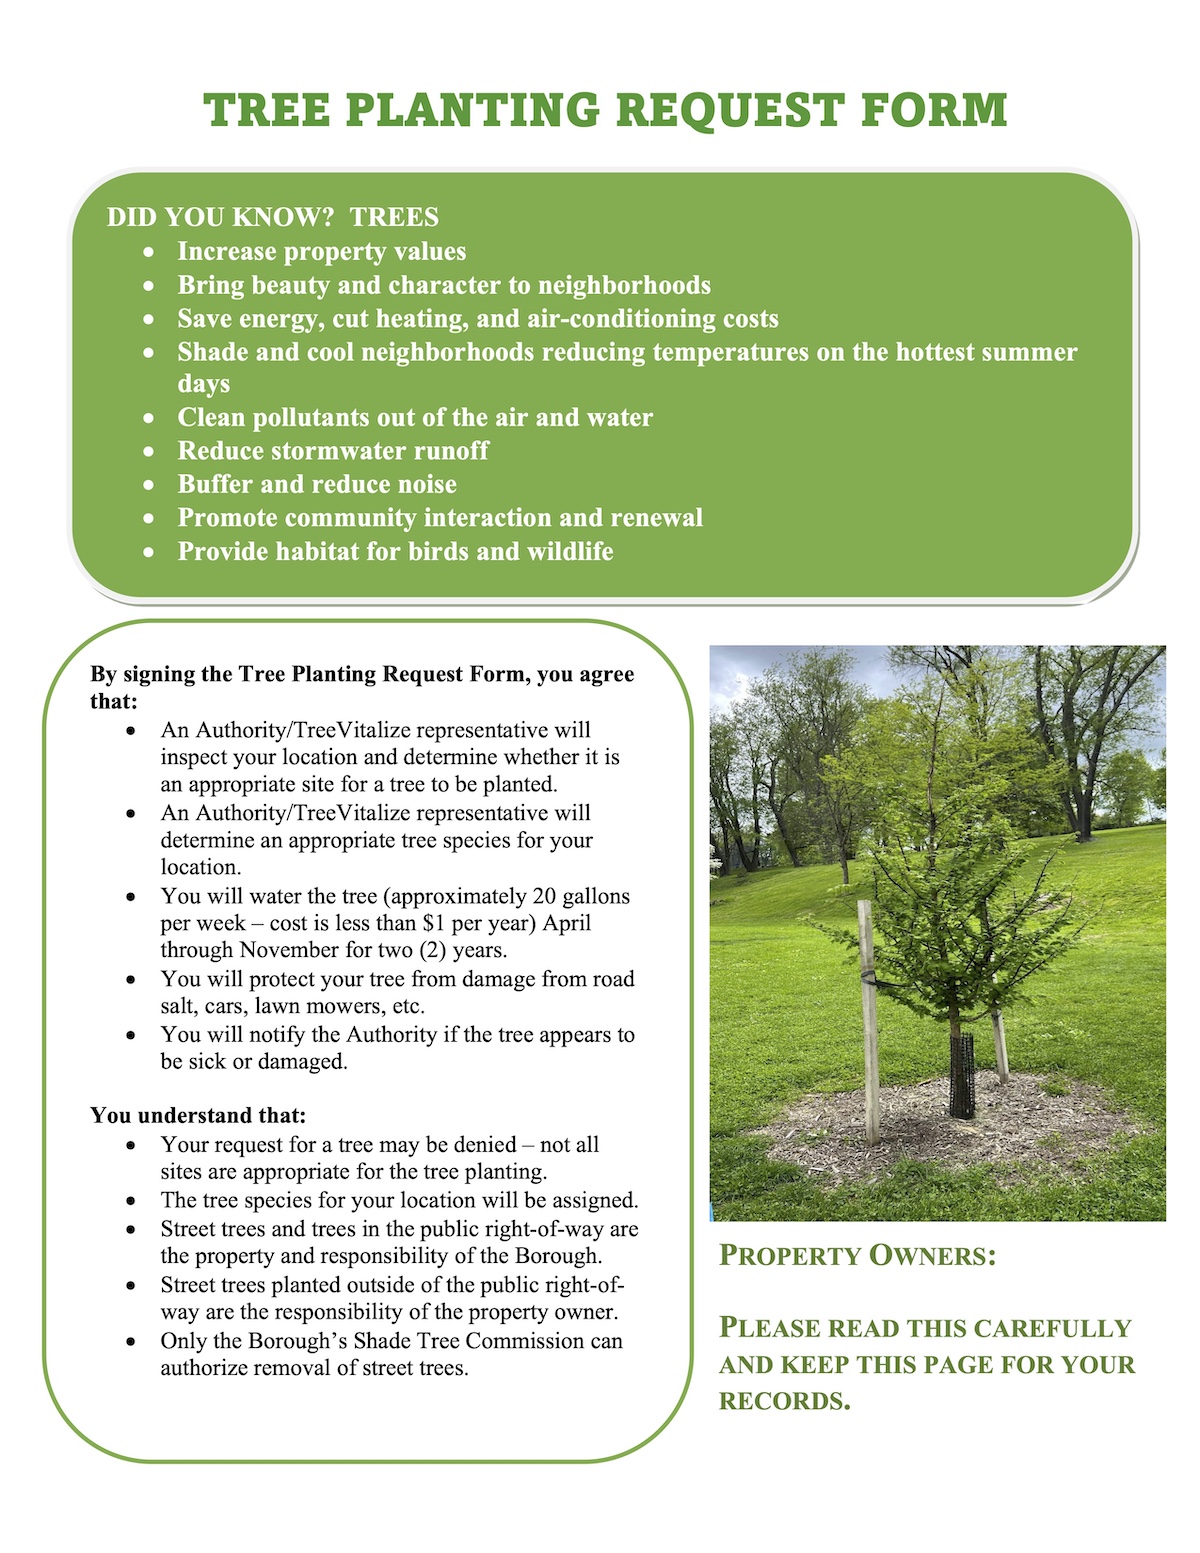 photo of tree planting details